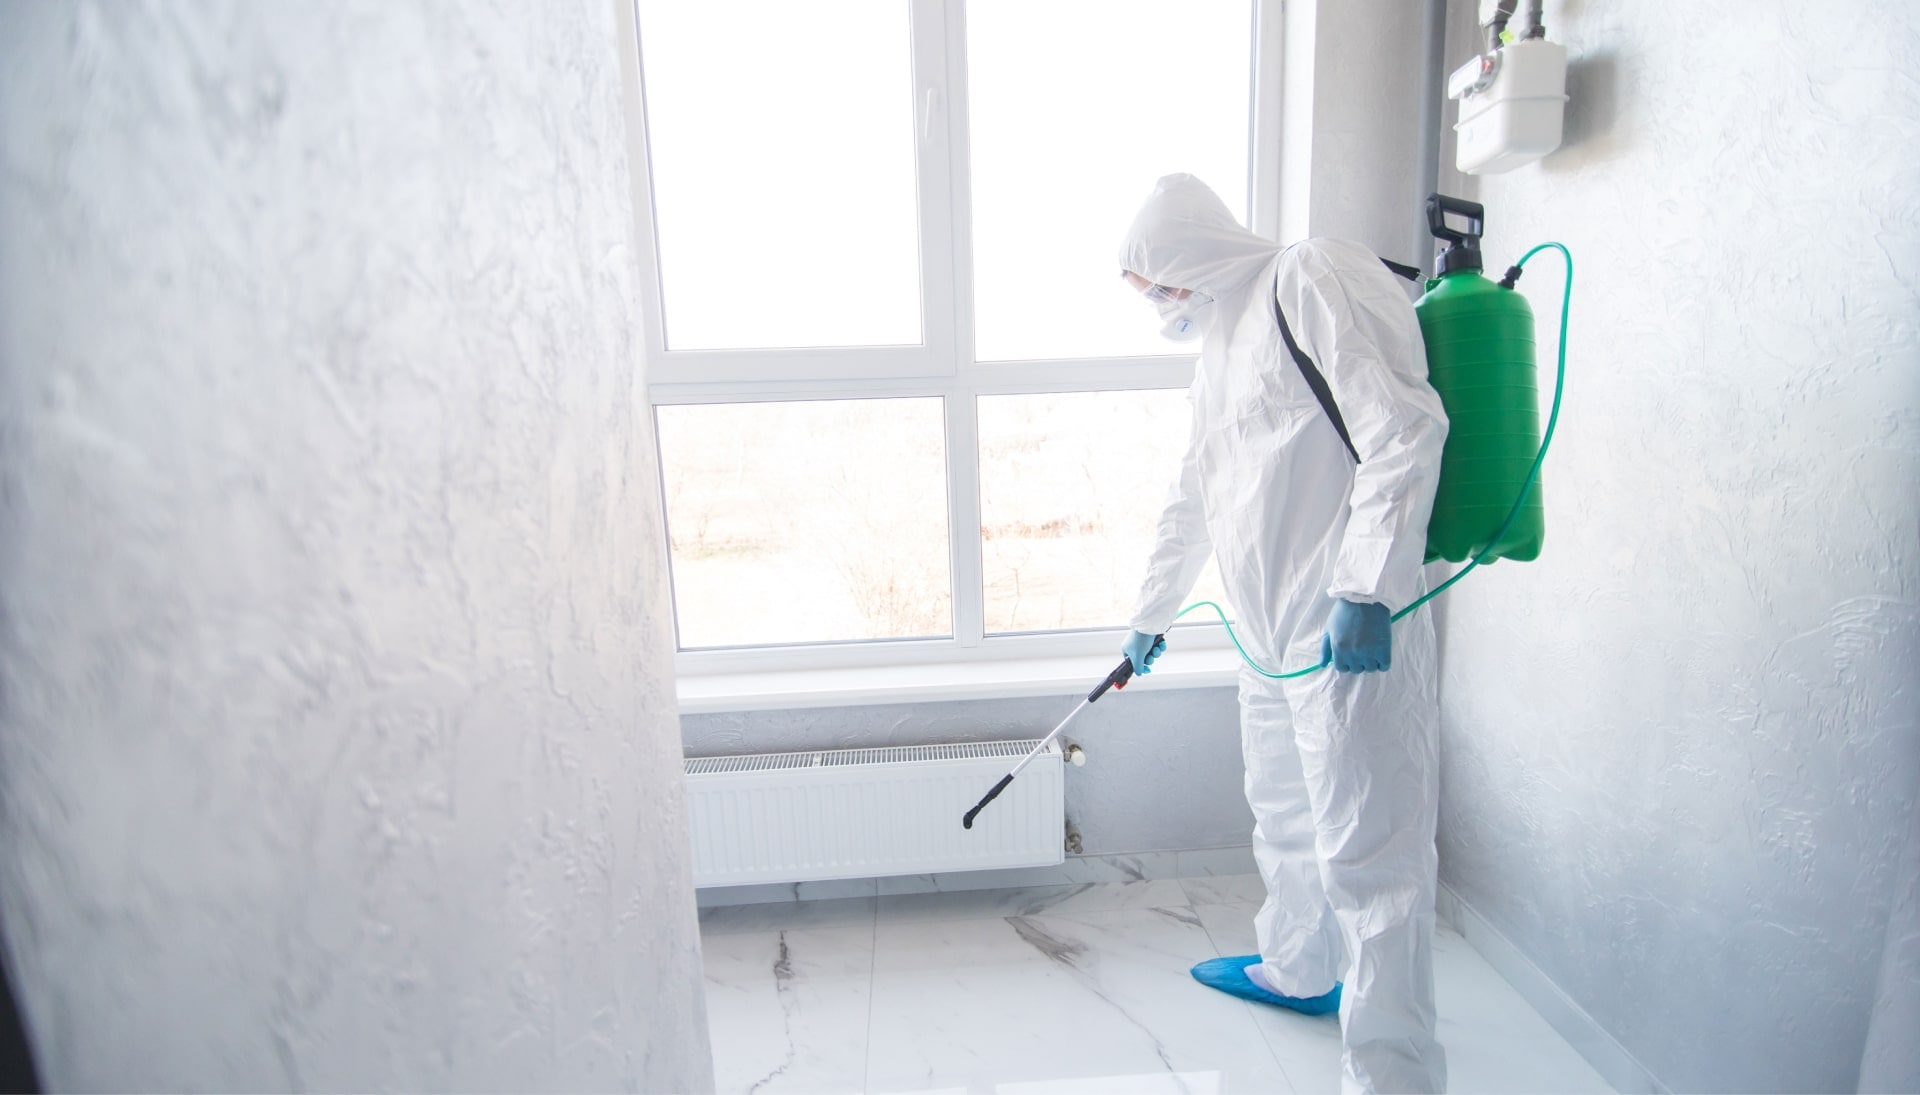 We provide the highest-quality mold inspection, testing, and removal services in the Buffalo, New York area.